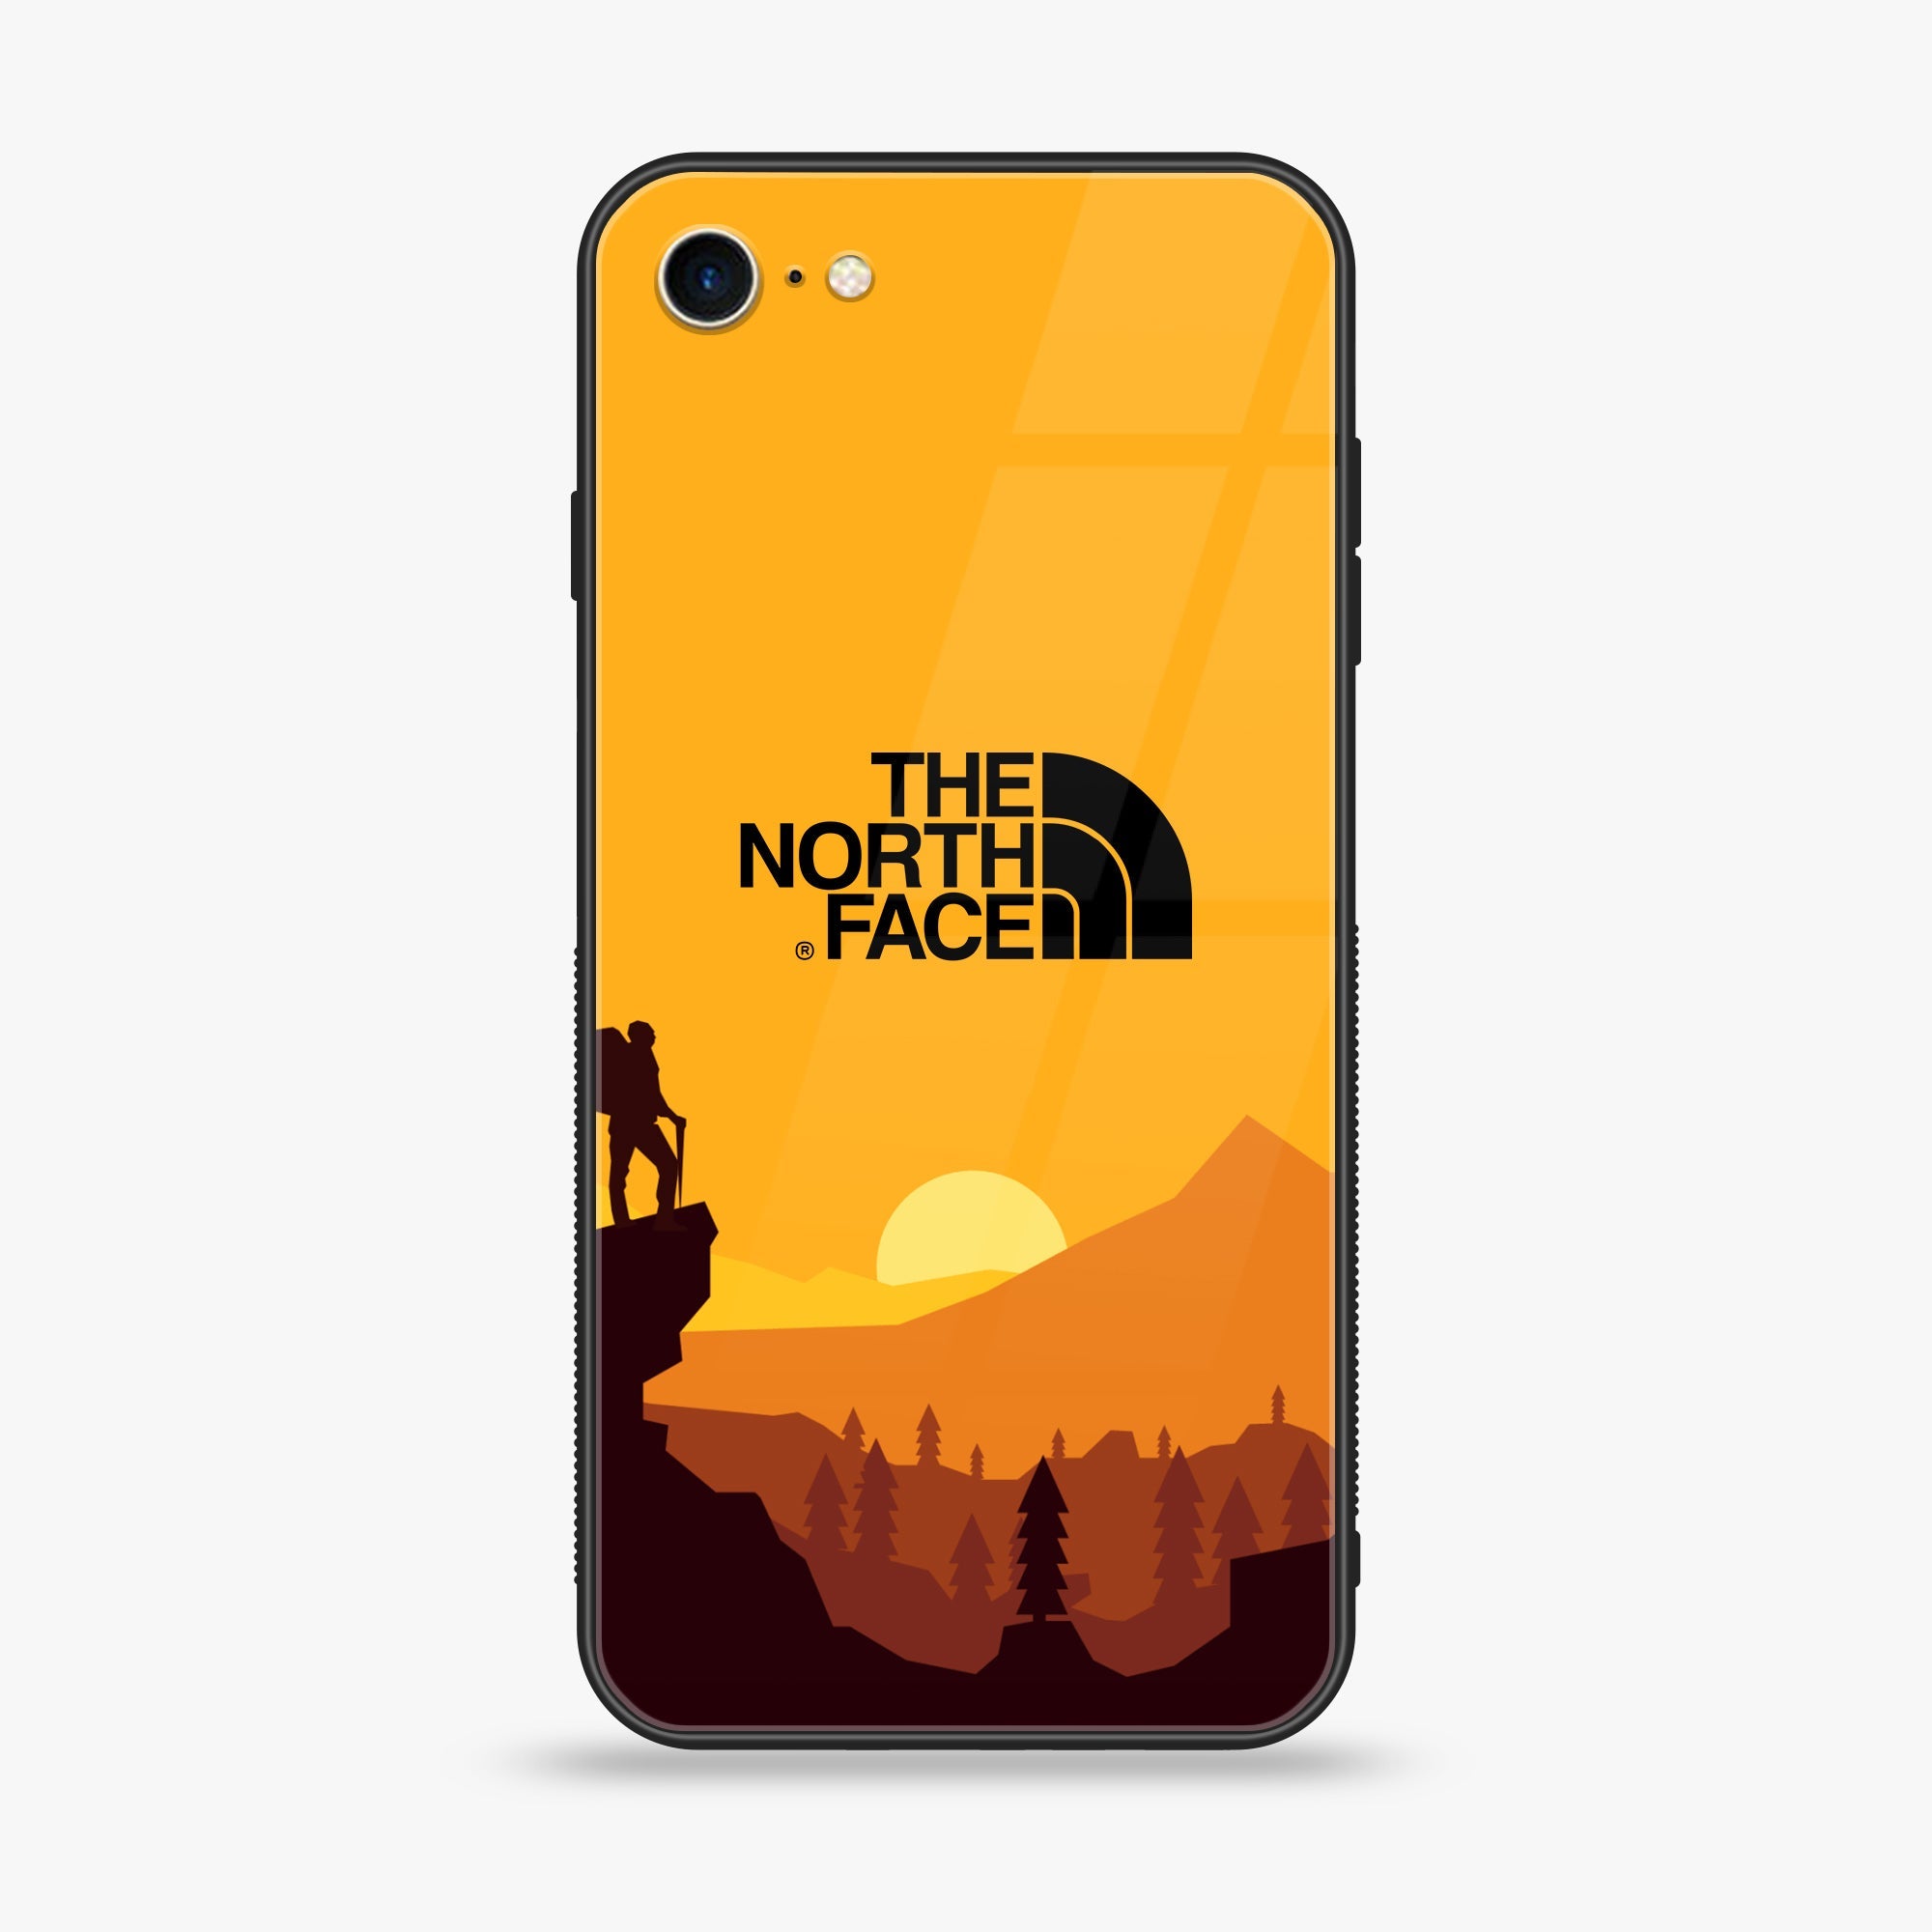 iPhone SE 2020 - The North Face Series - Premium Printed Glass soft Bumper shock Proof Case